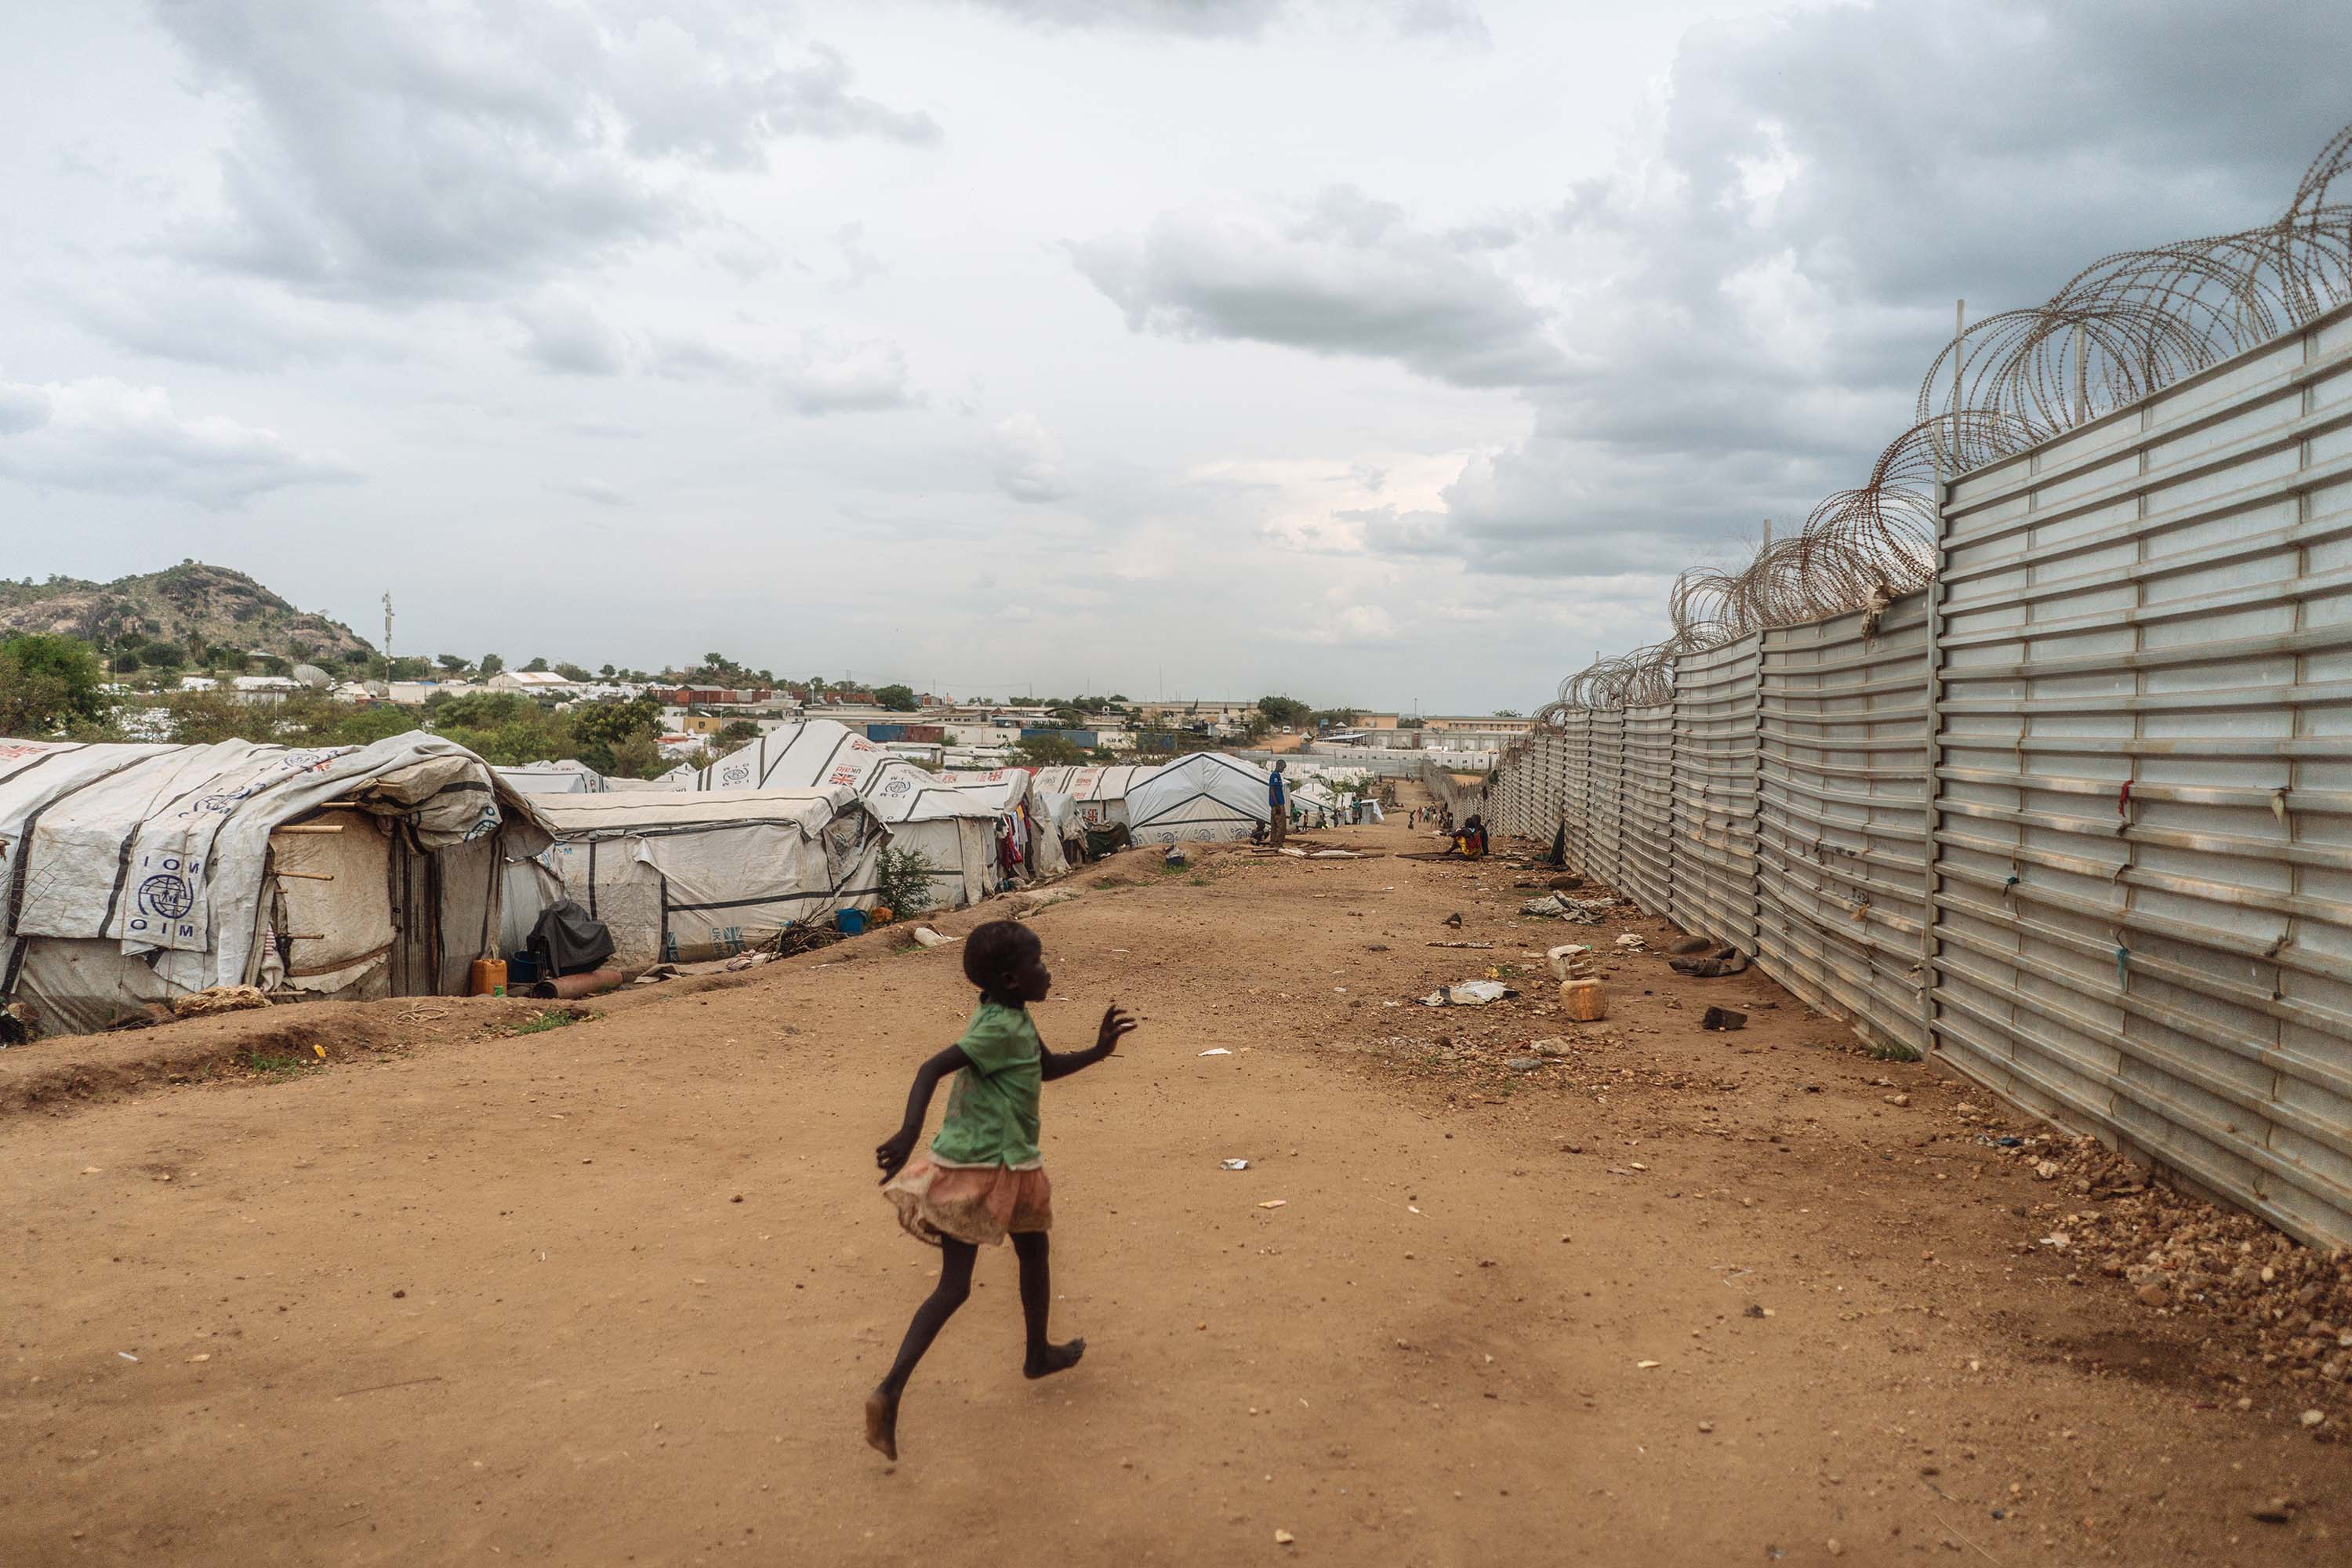 A young girl runs inside the camp, the largest in the capital city.